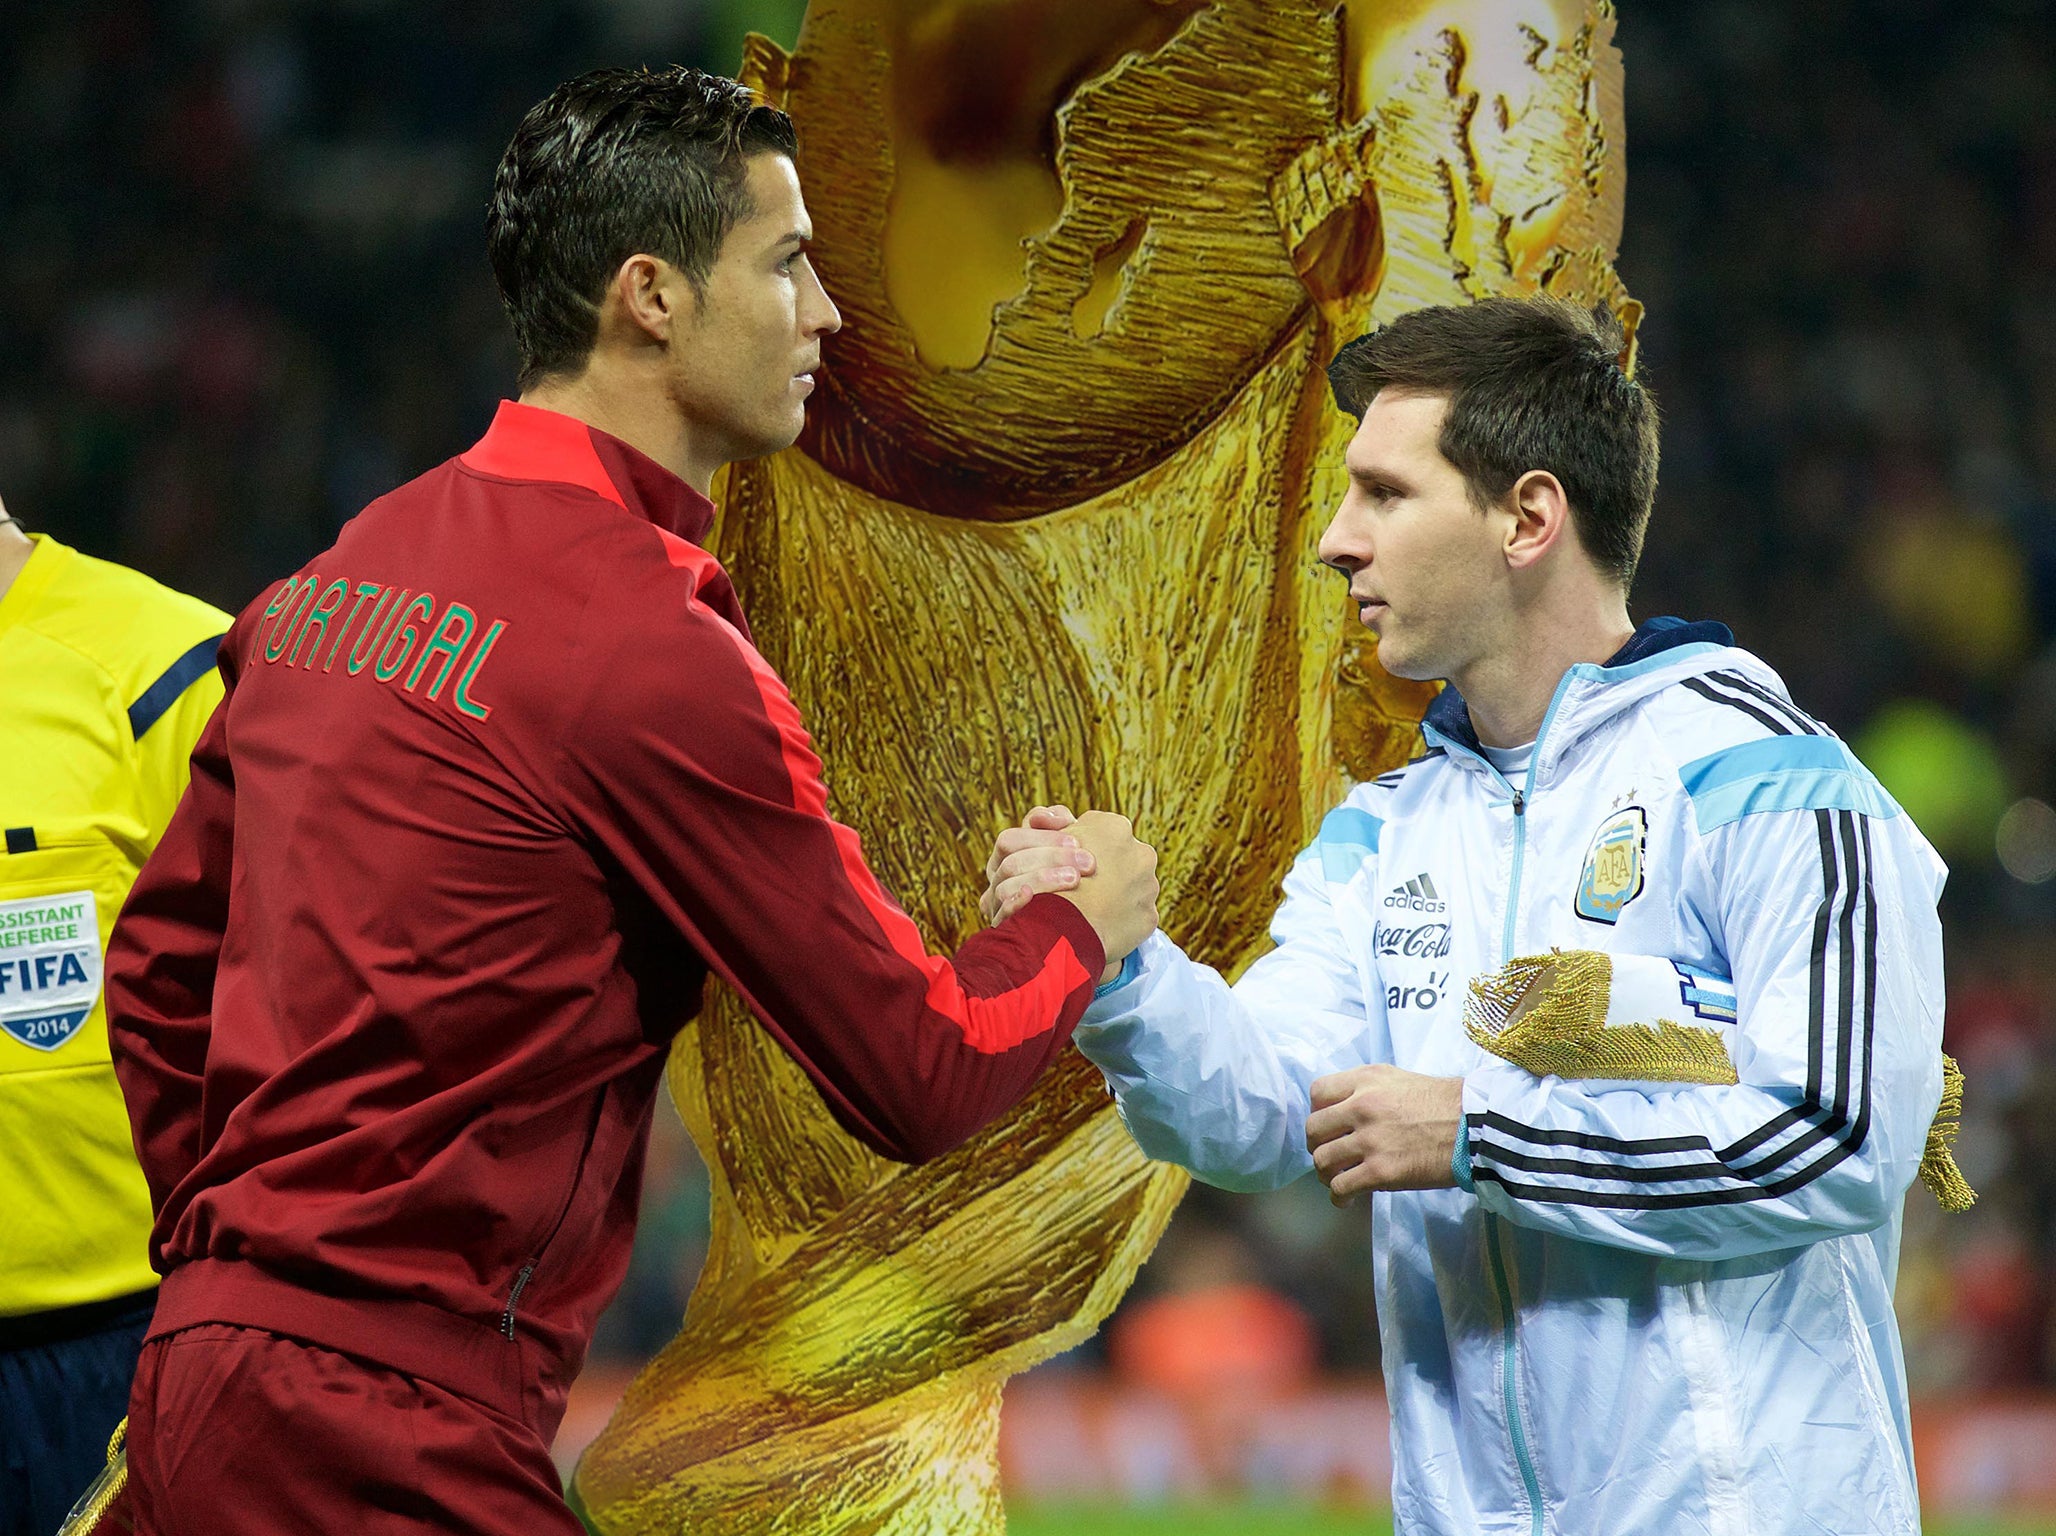 Ronaldo and Messi could both miss out on the World Cup